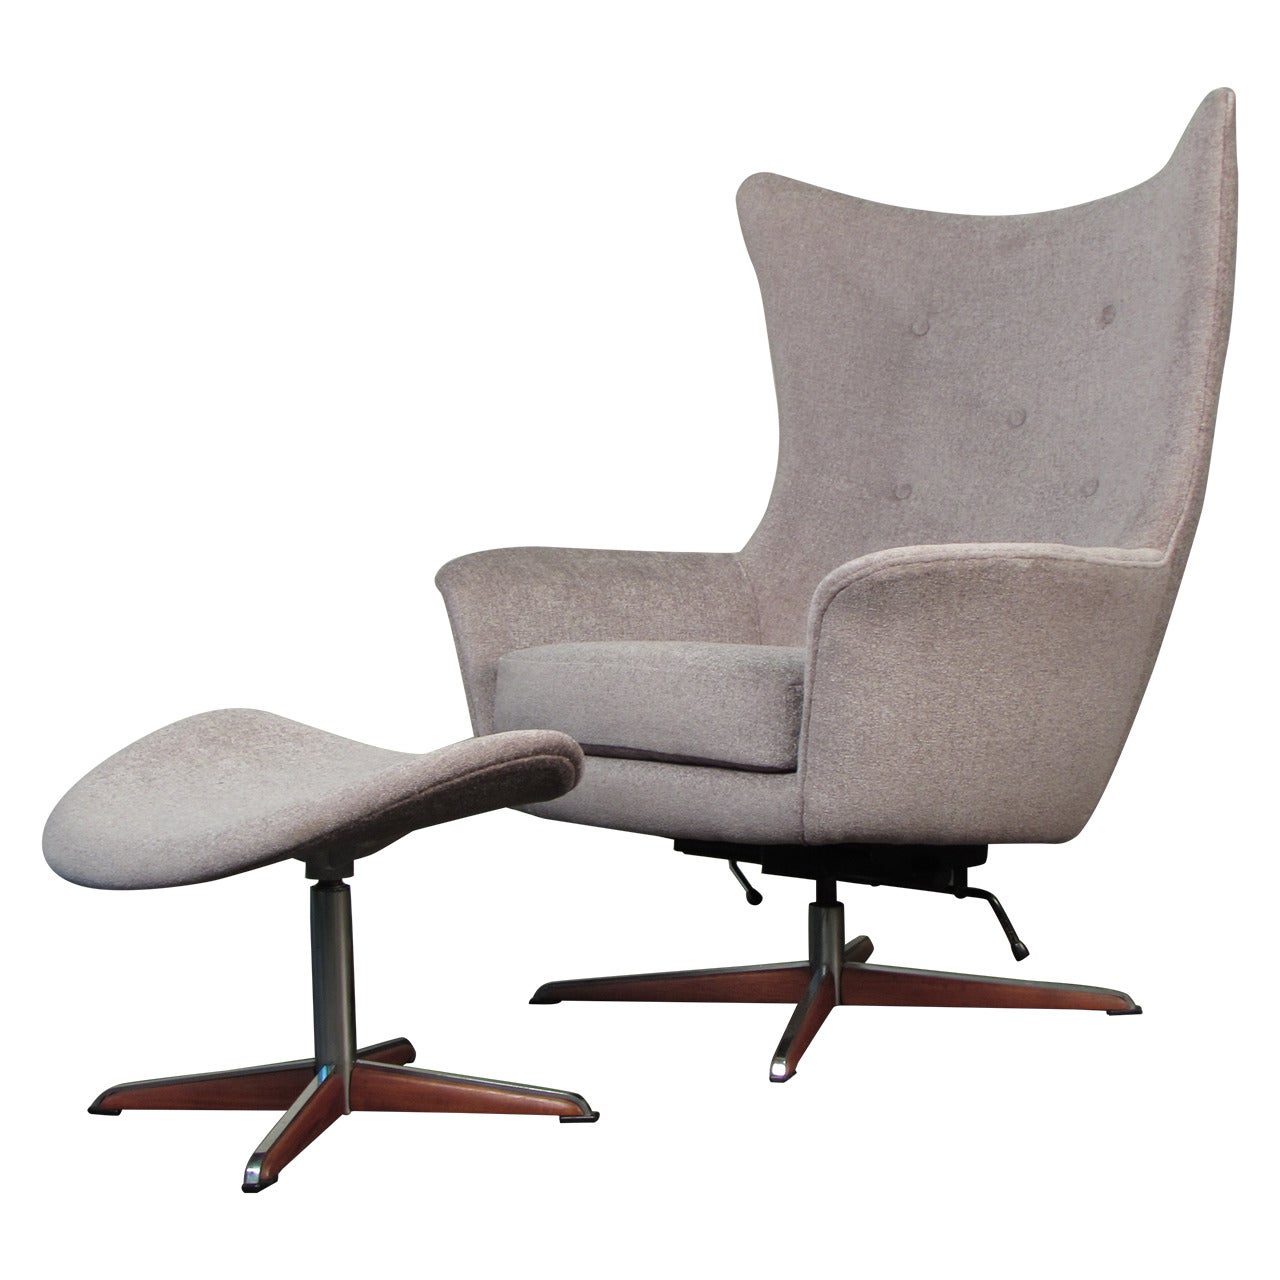 Rare Sculptural Lounge Chair and Ottoman by H.W. Klein for Bramin, Denmark